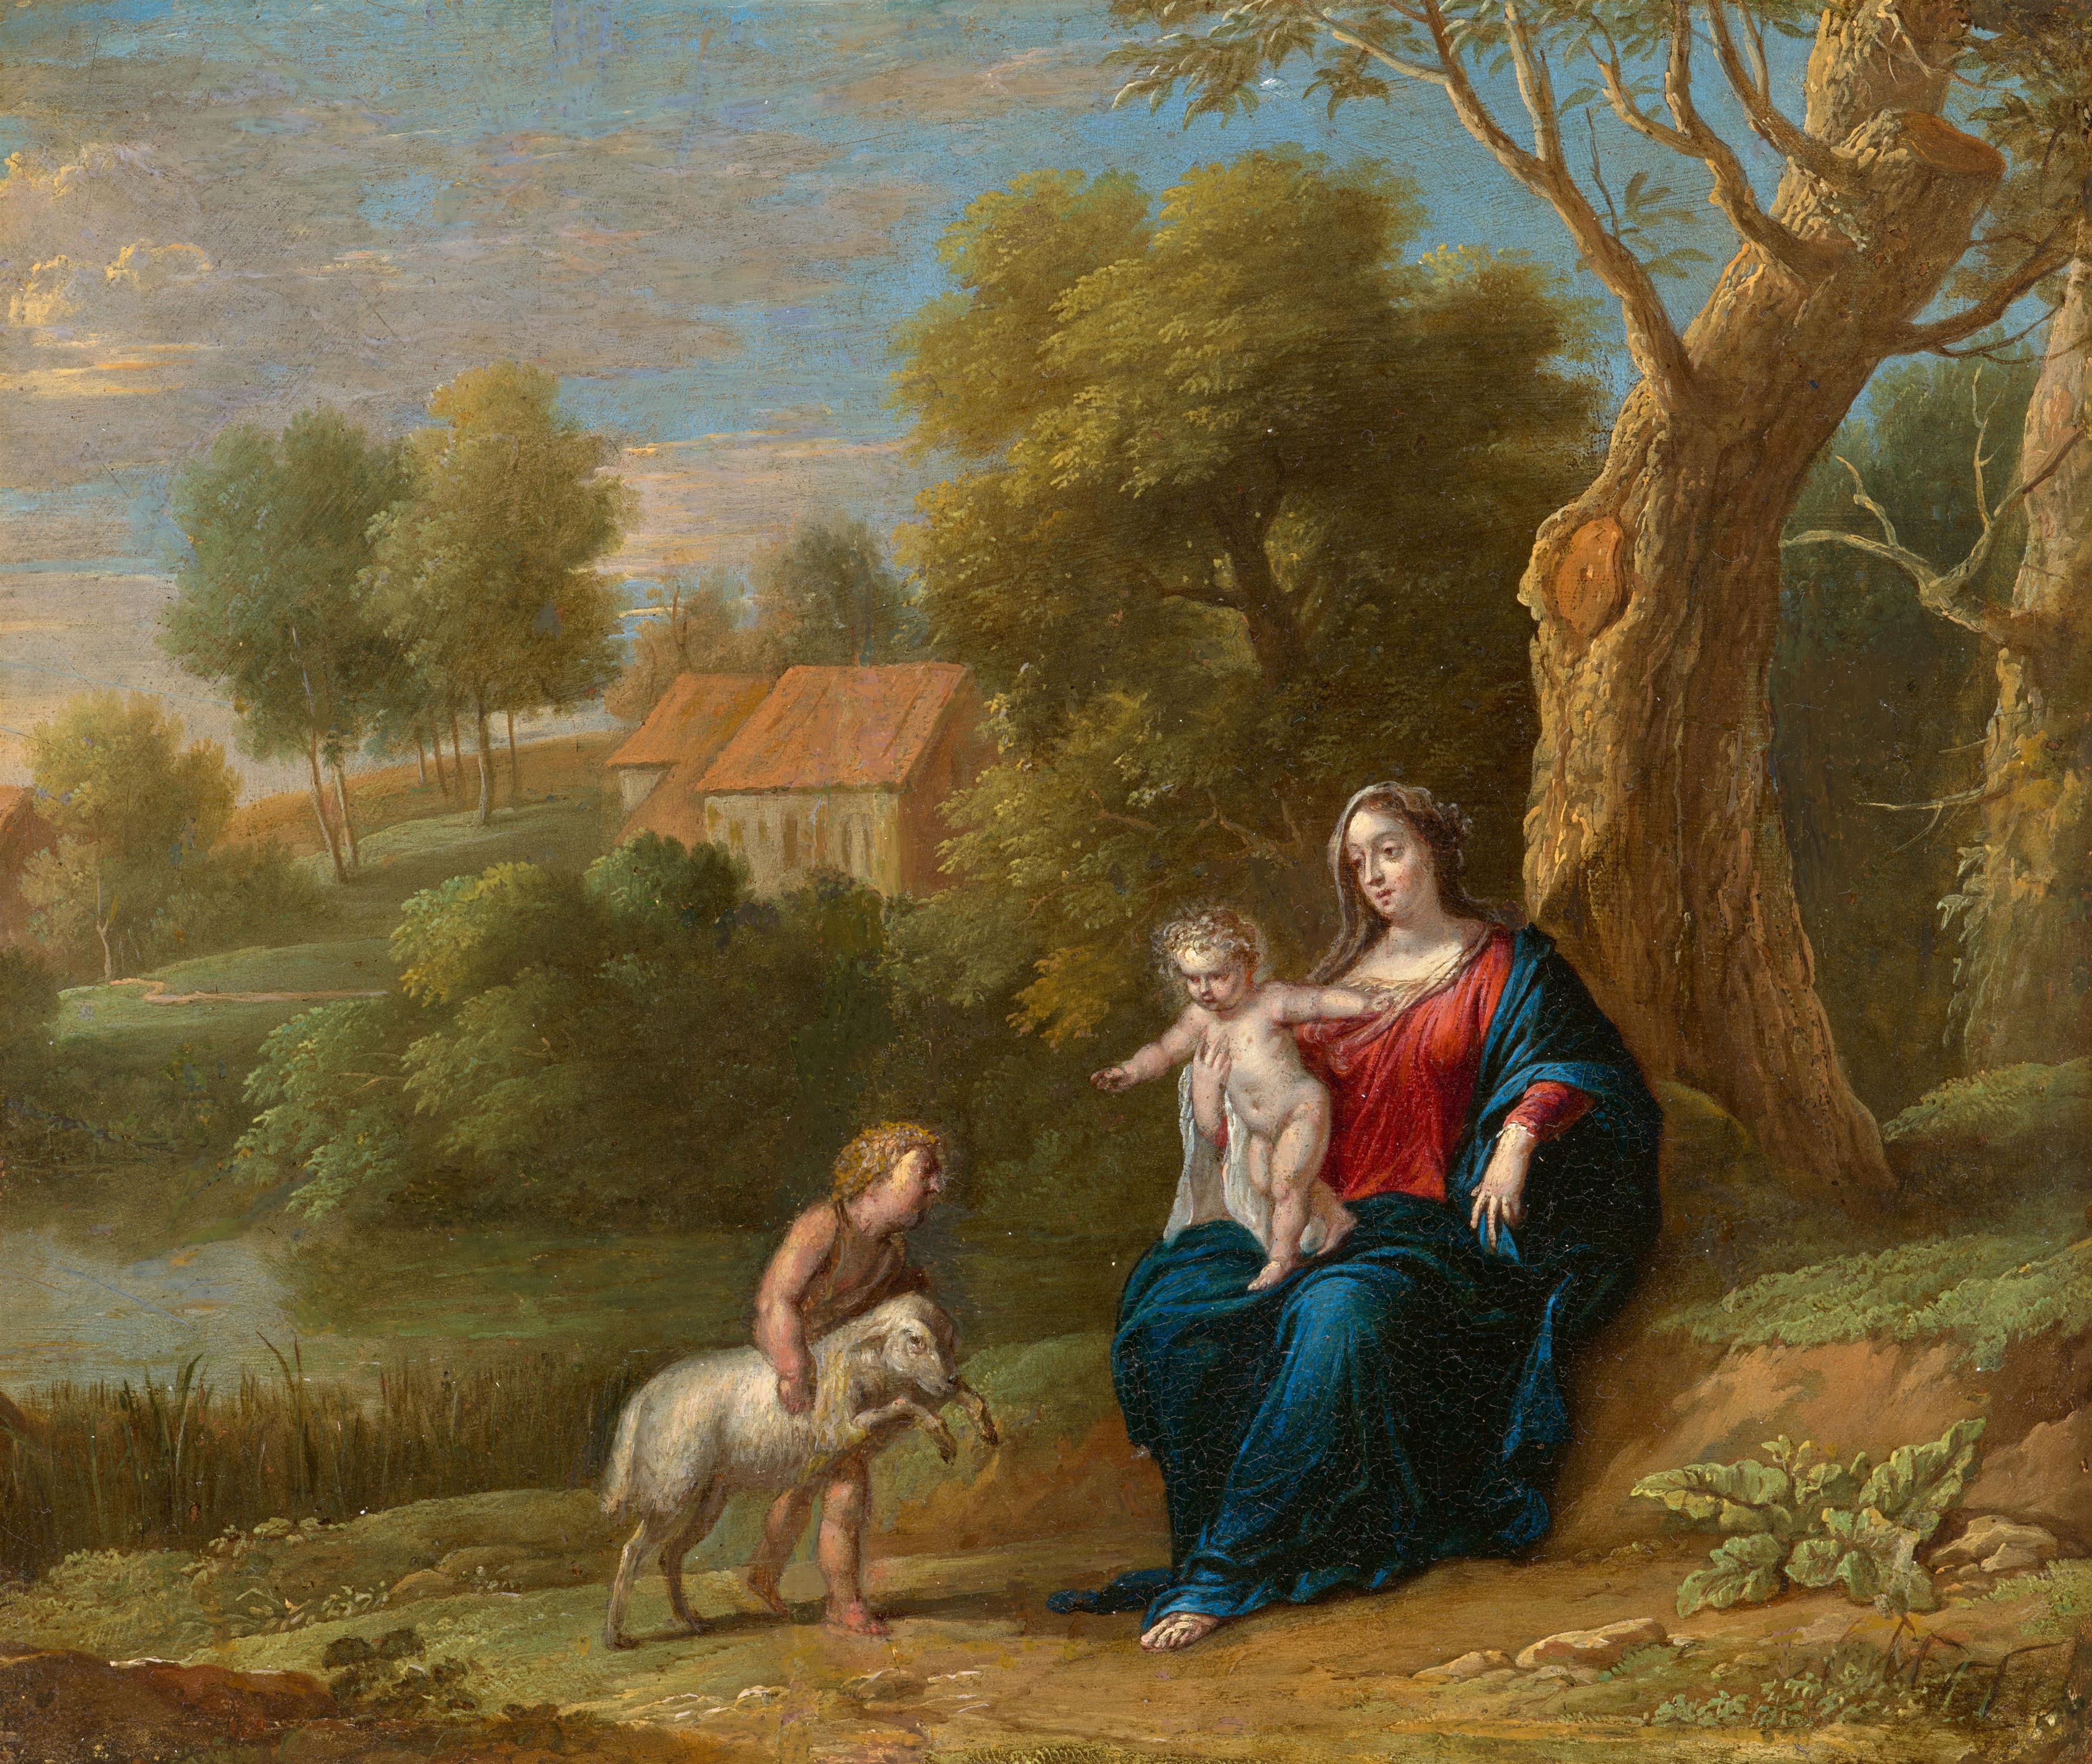 Abraham Willemsen - The Virgin with Jesus, Saint John and the Lamb - image-1